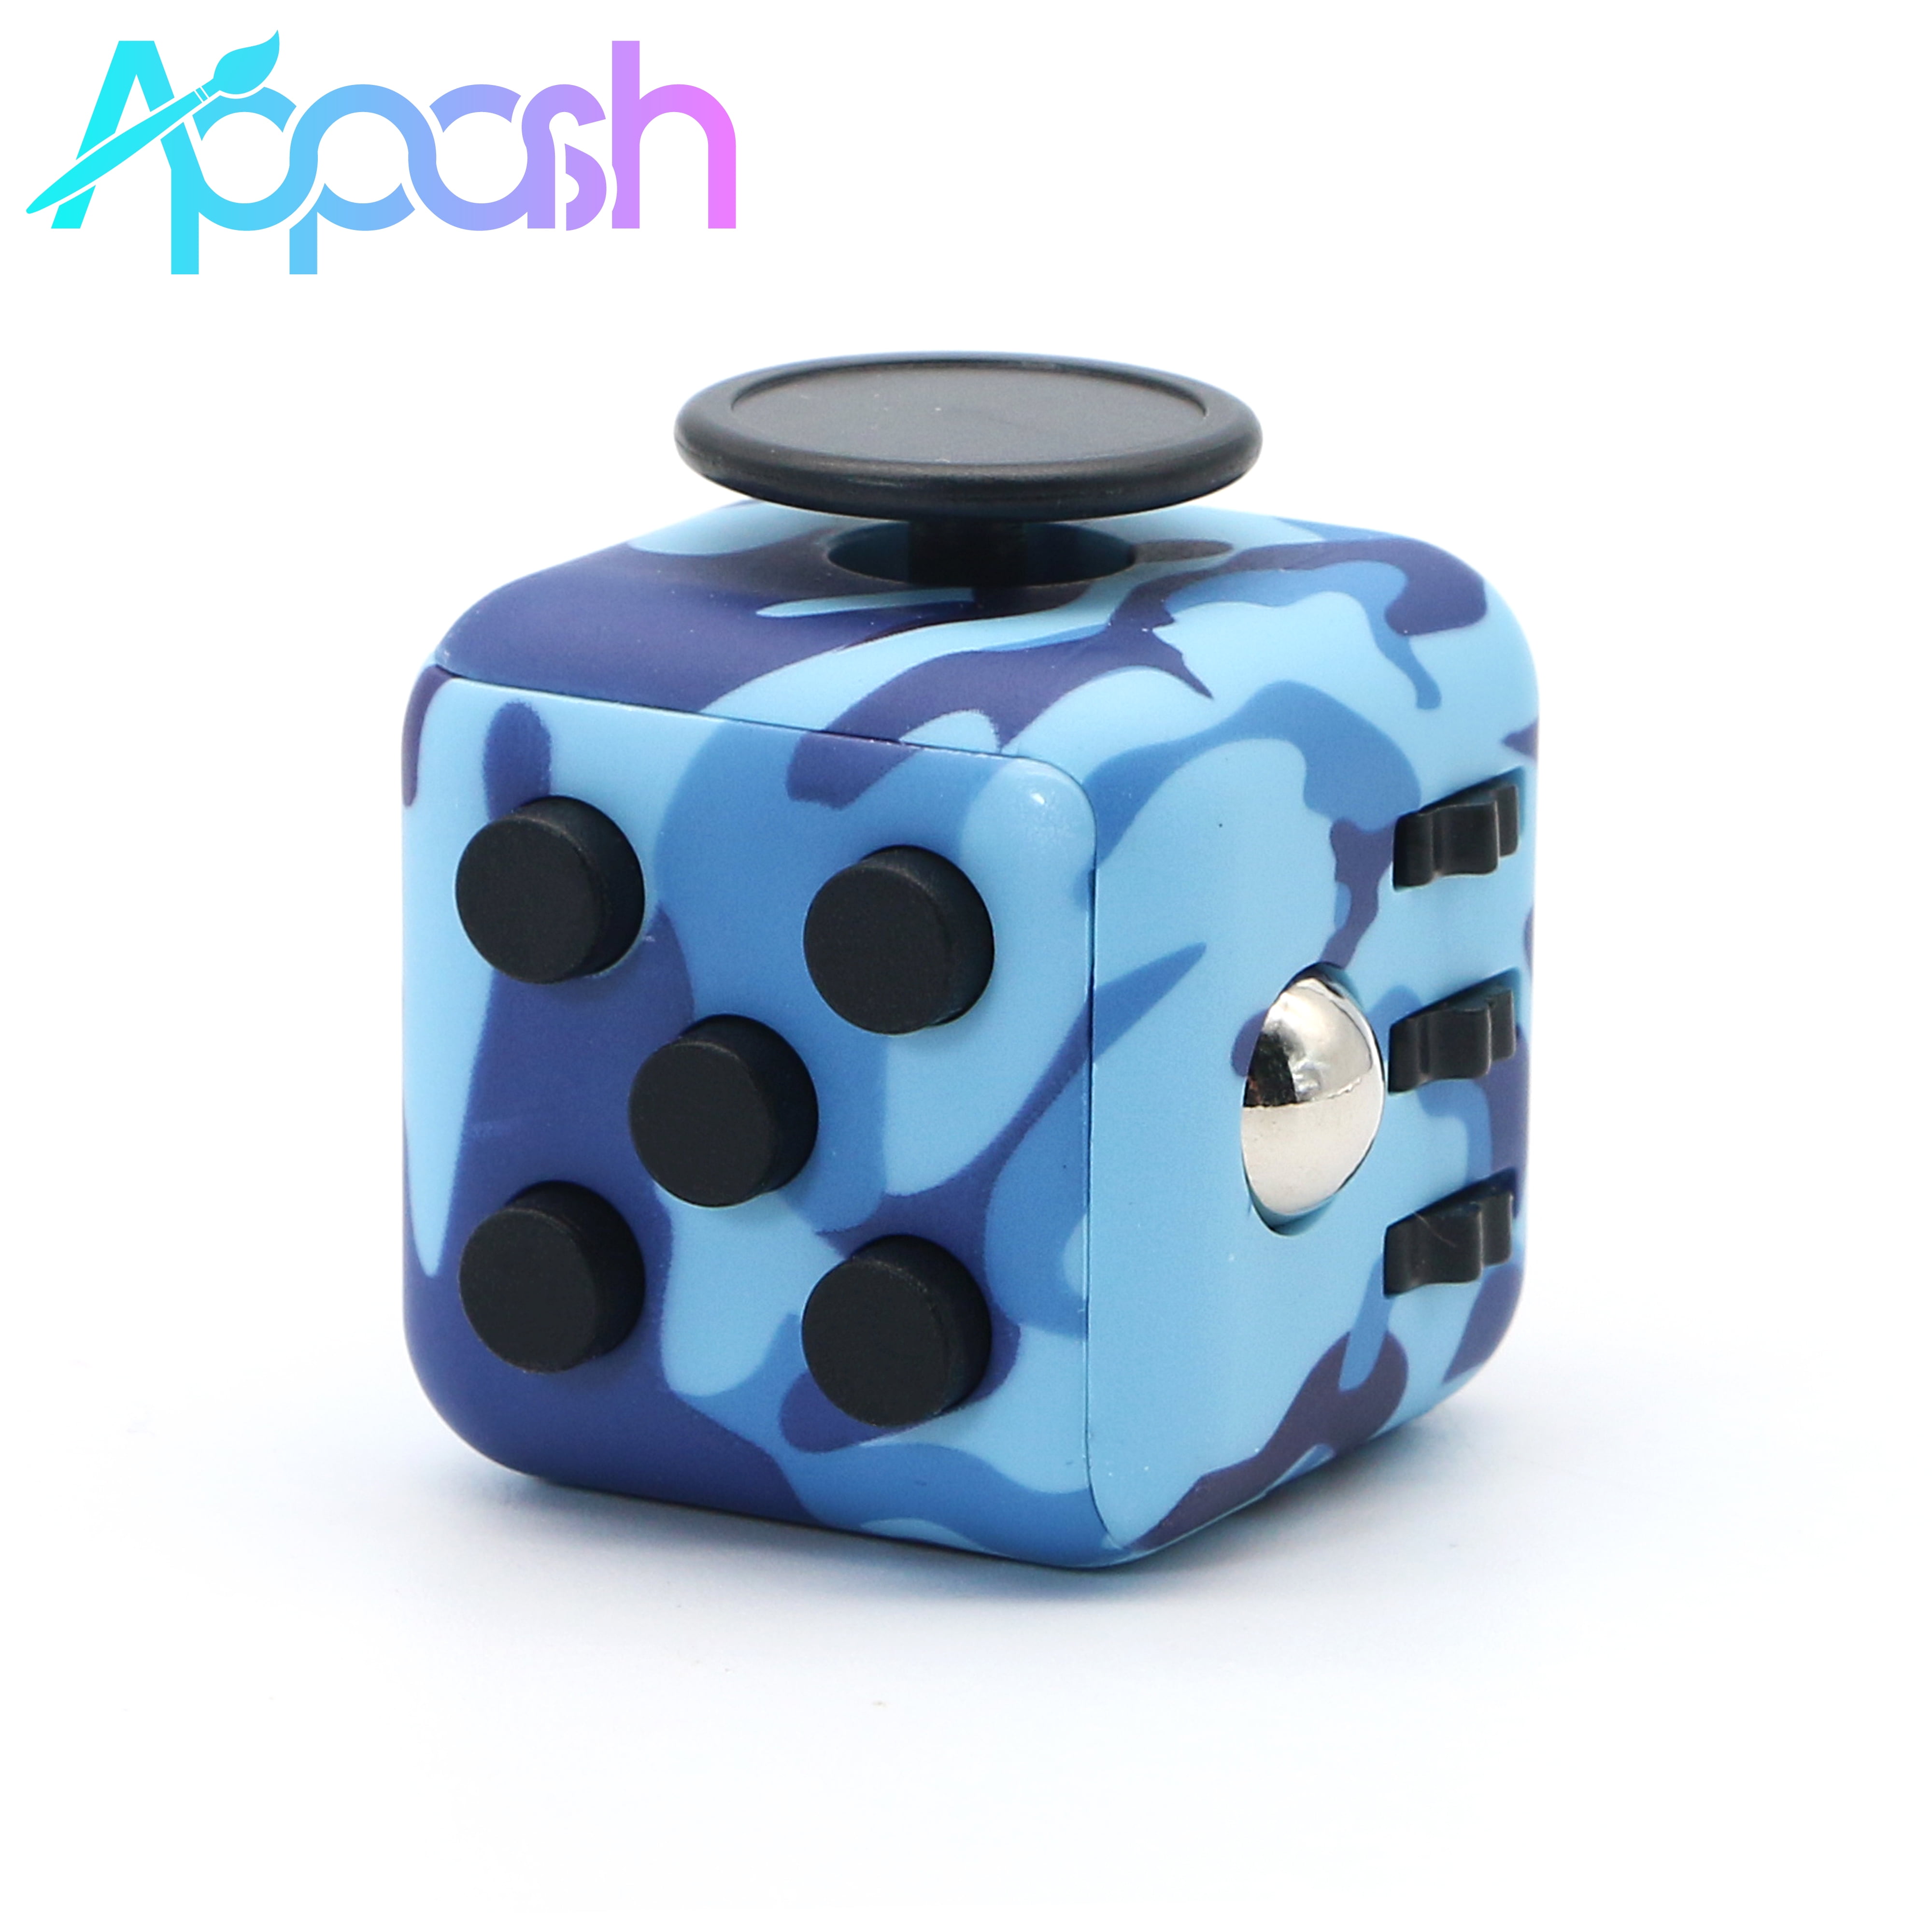 Fidget Cube Stress Anxiety Pressure Relieving Toy great for Adults and Children 